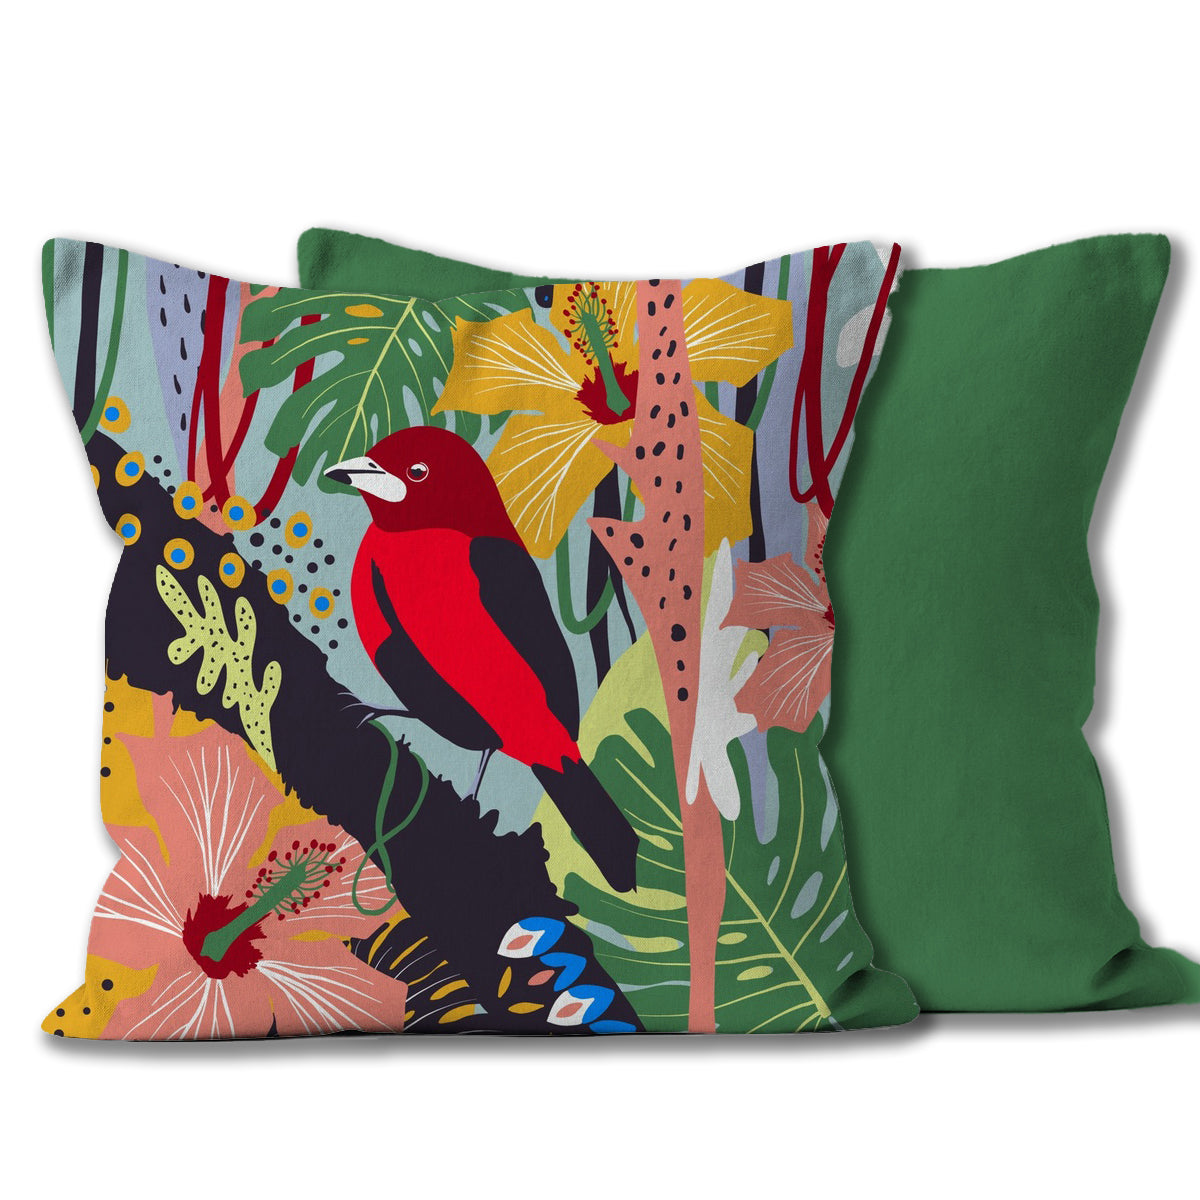 Tropical floral Tanager bird cushion.  Illustration of the rainforest with reds, pinks. greens and mustard colourful.  Front and Back of Cushion